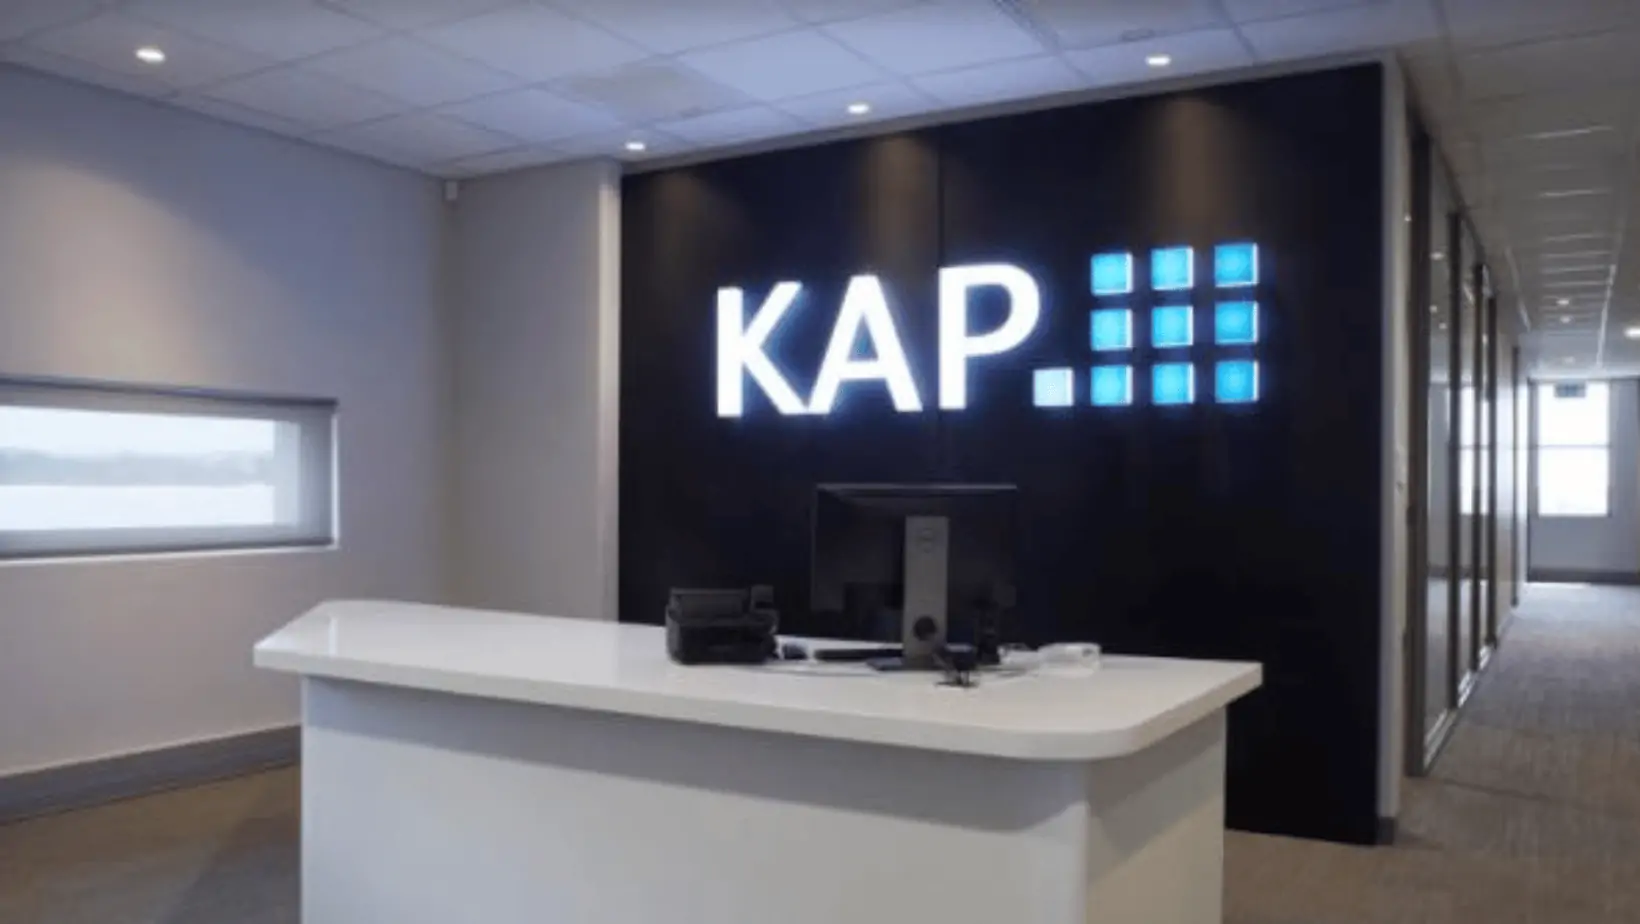 KAP Limited Appoints PSG Capital as New Debt Sponsor, Prioritizing Efficiency and Governance